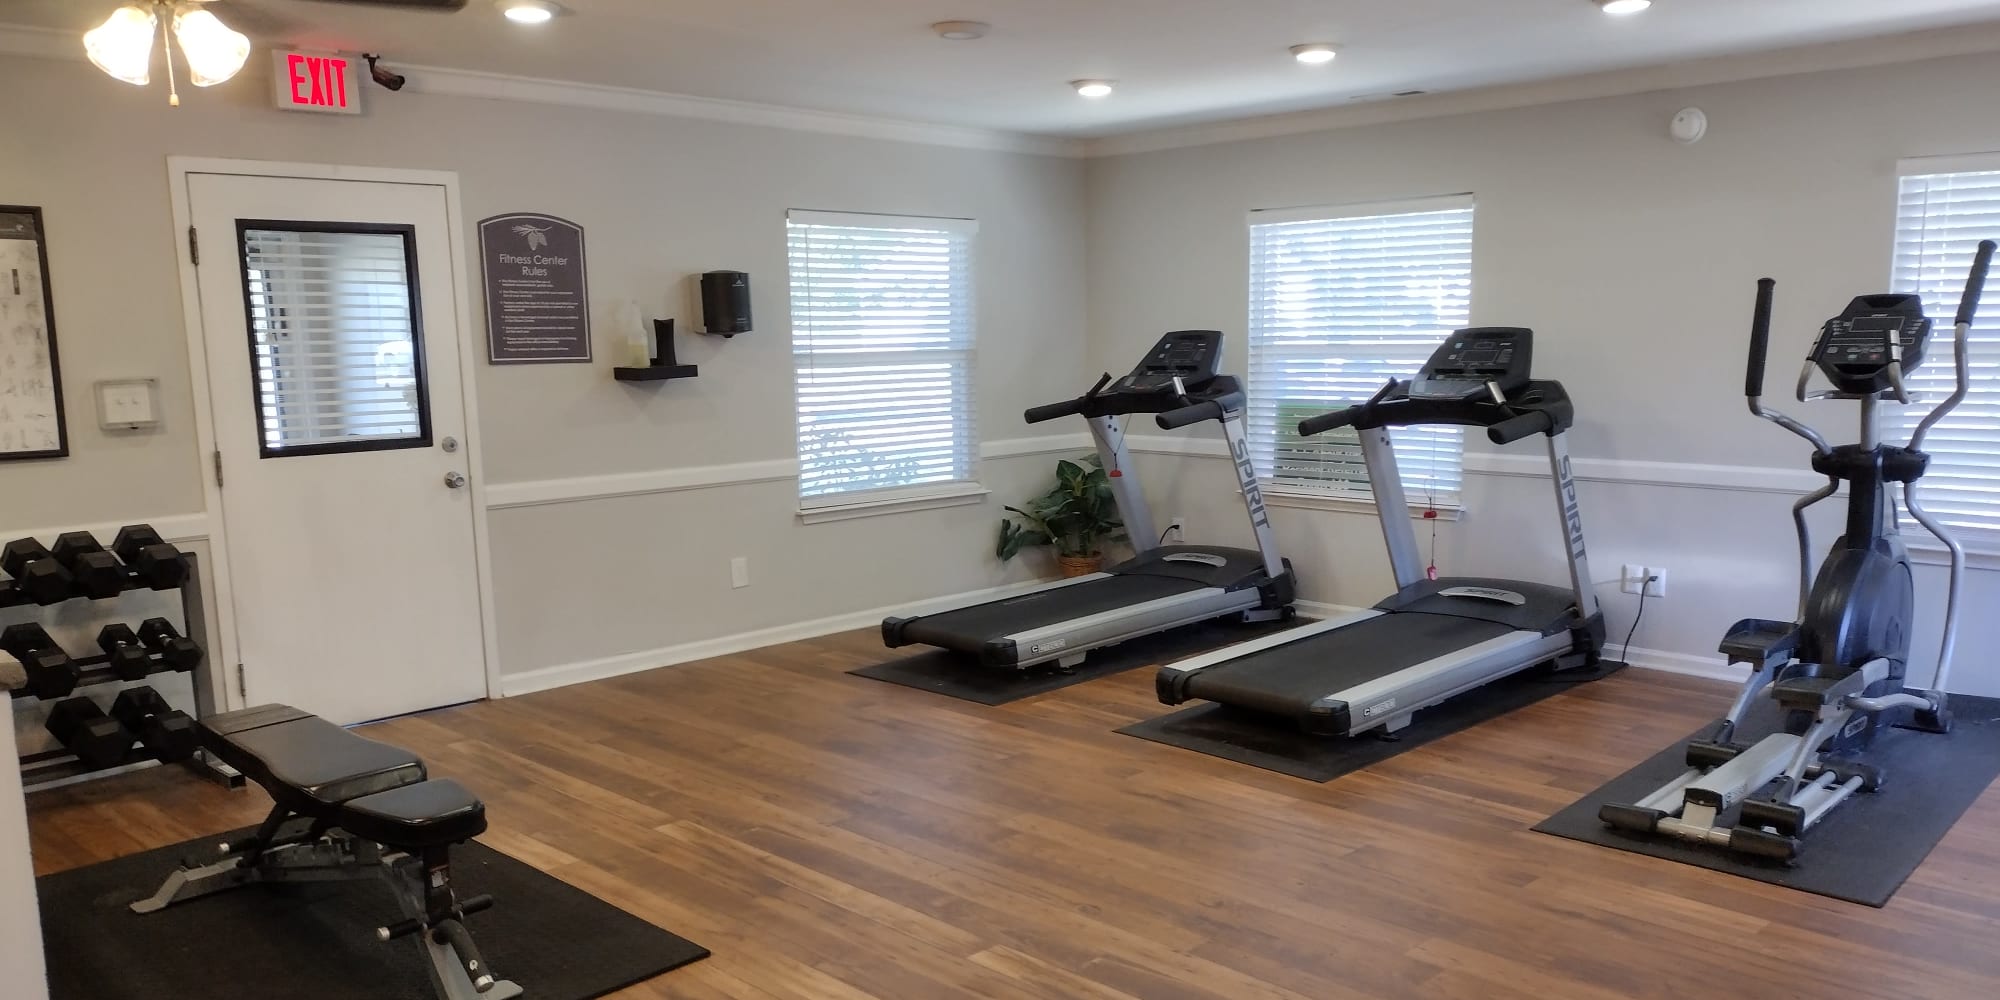 Fitness center at Madison Pines Apartment Homes in Madison, Alabama